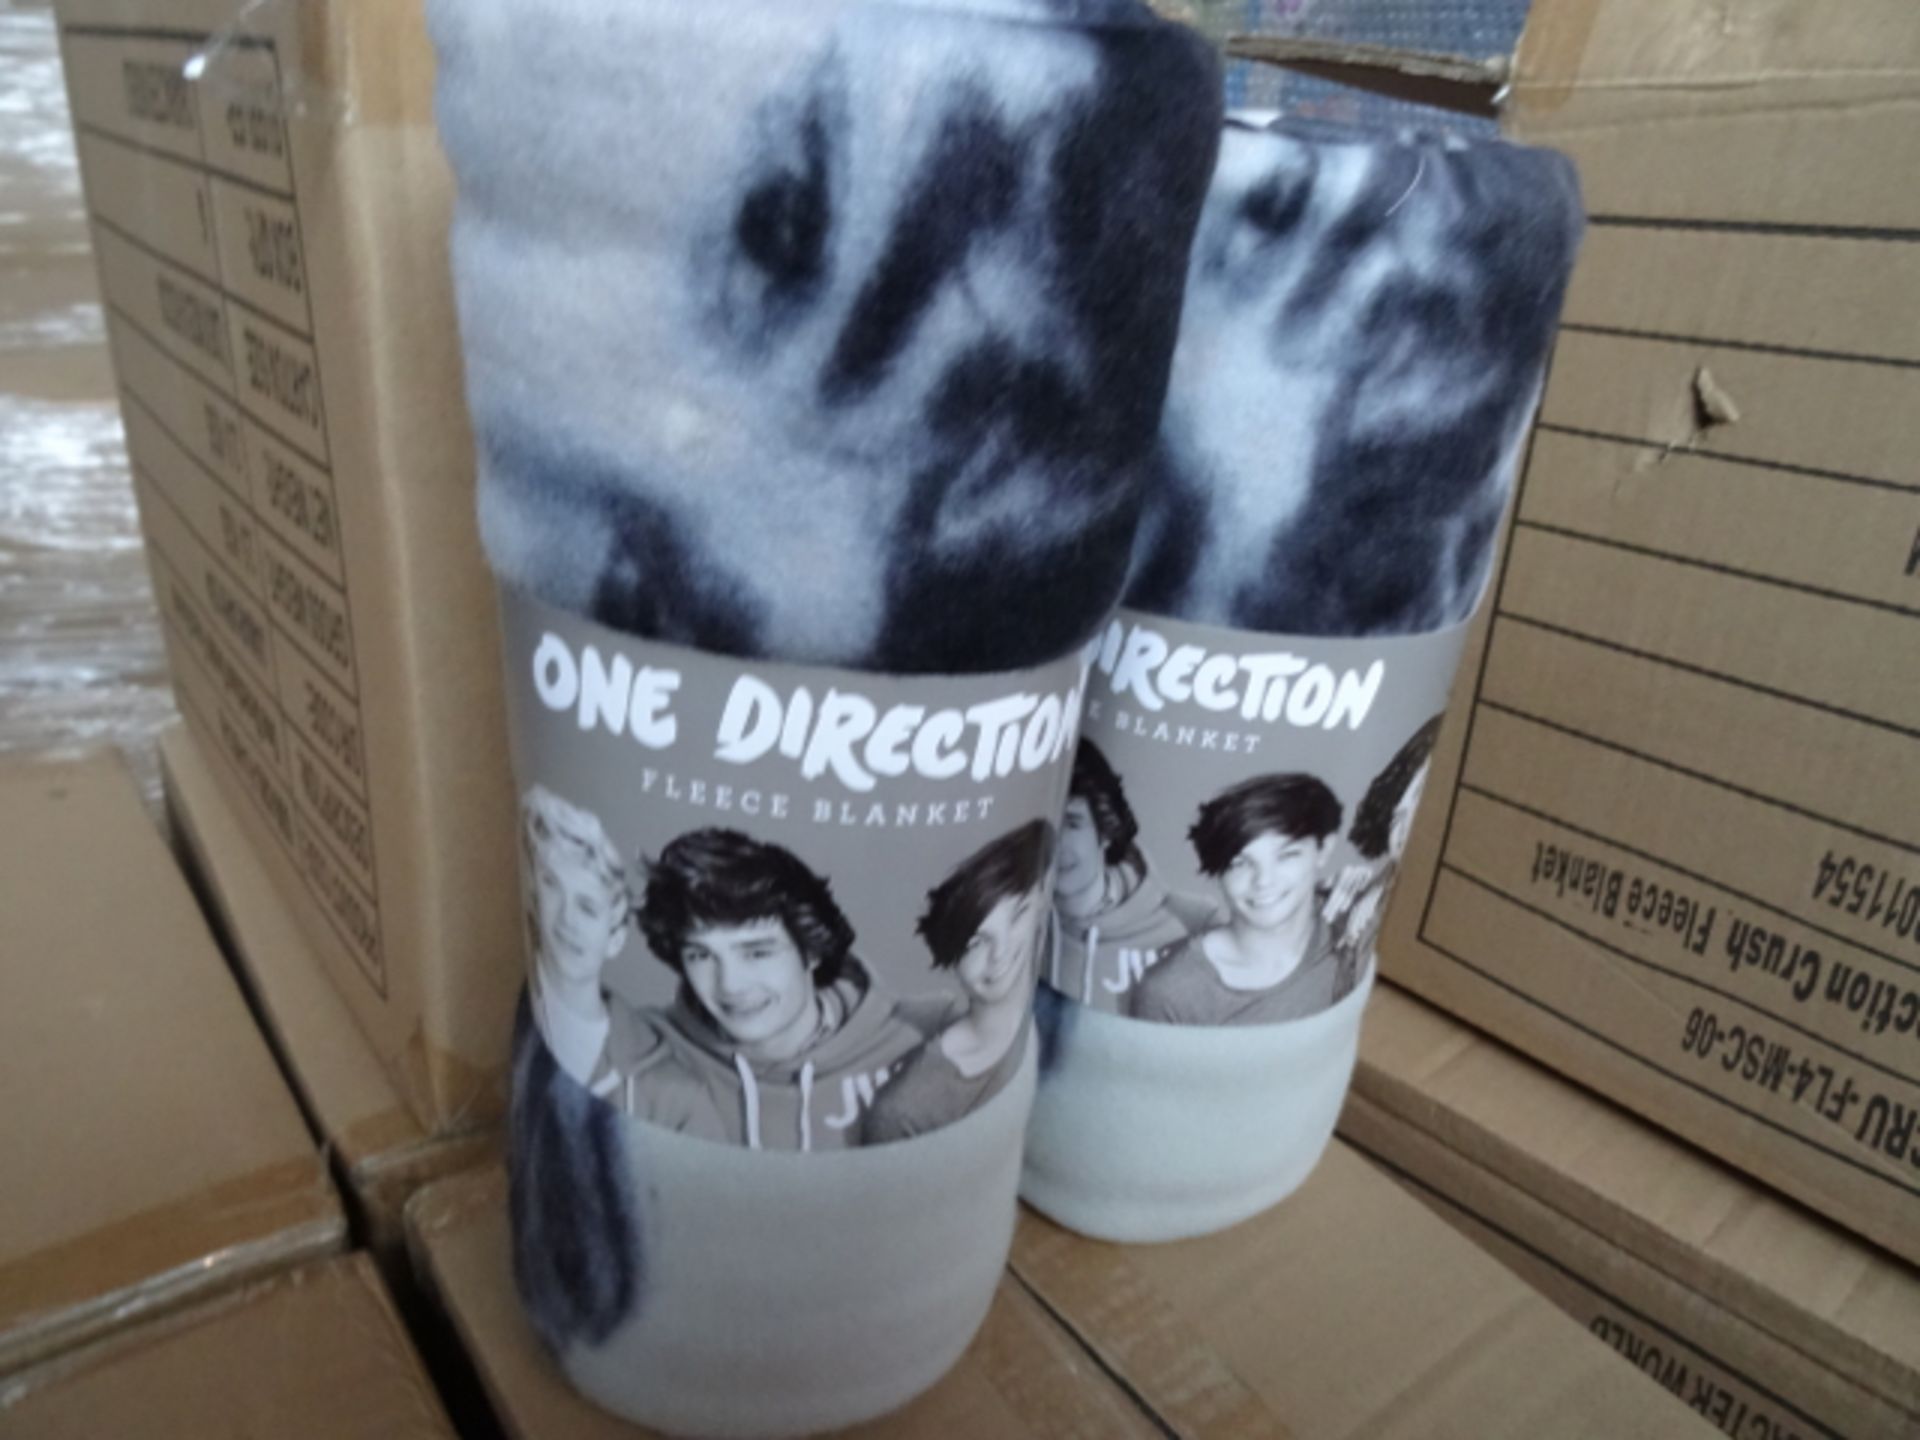 12 x One Direction Fleece Blankets! Just in time for this chilly winter! 120 x 150cm. High retail